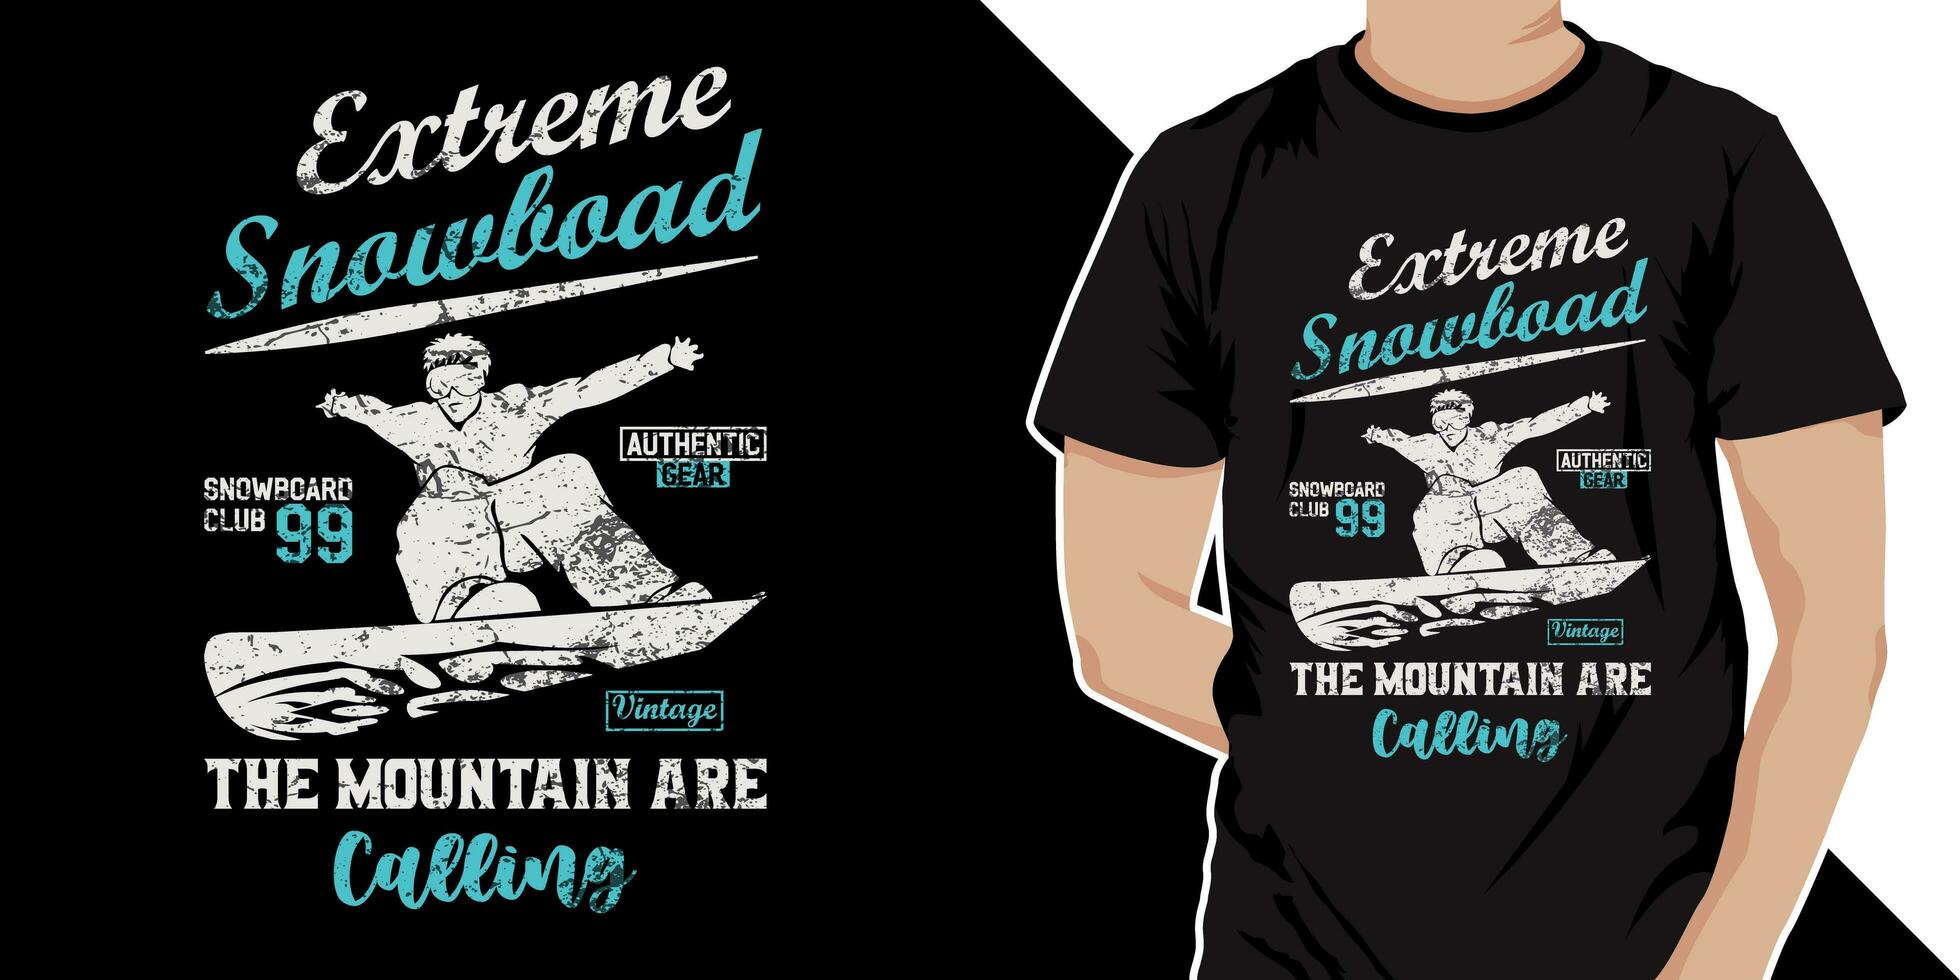 Extreme snowboard the mountain are calling t shirt design. Skiing snowboarding vintage t shirt design photo